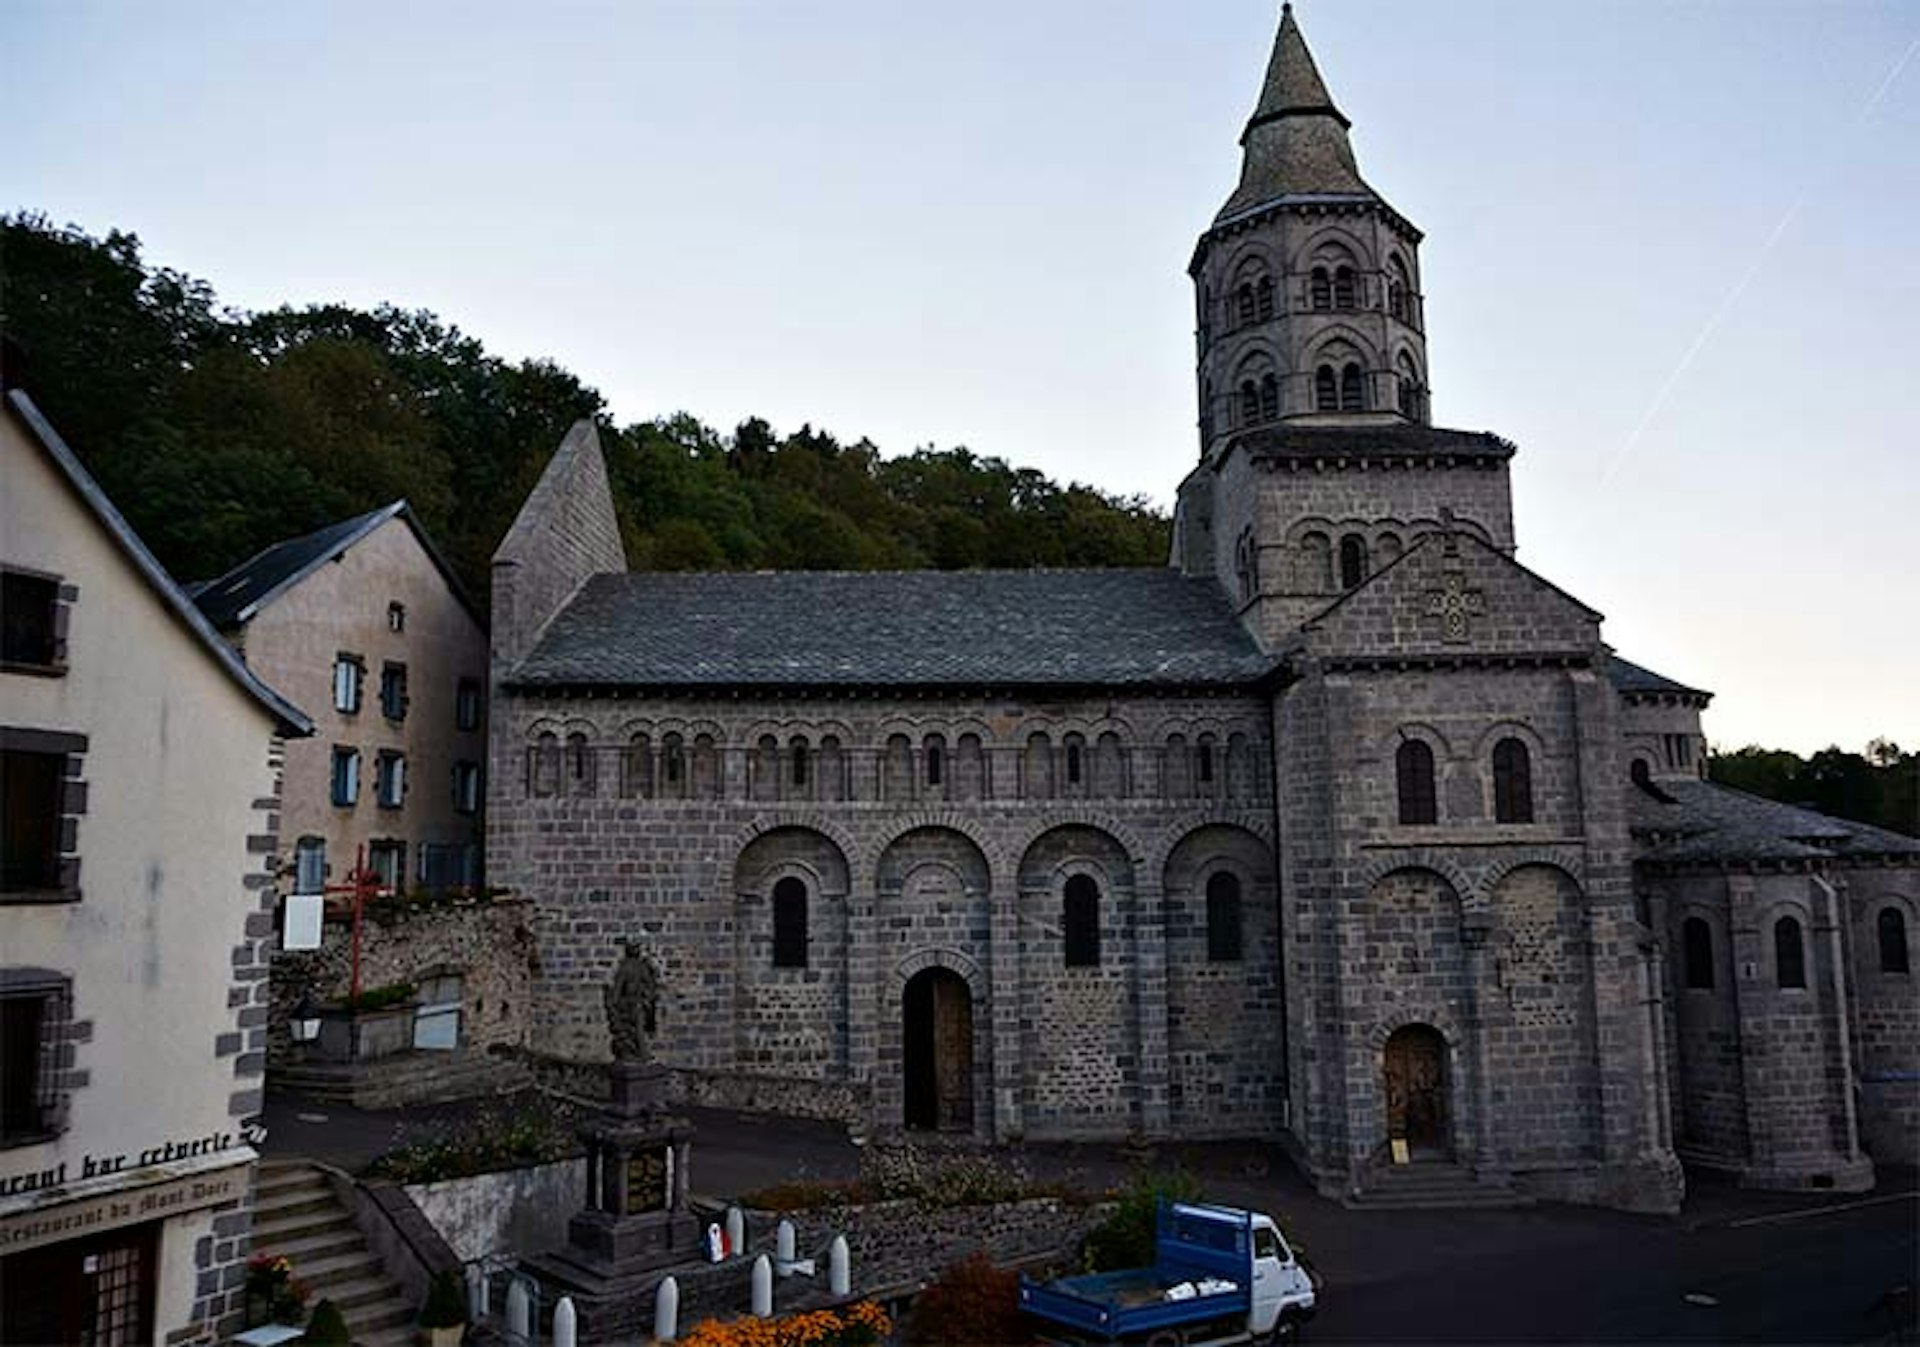 Notre-Dame d’Orcival, a Romanesque gem, is a magnet to pilgrims for an annual feast day, in an otherwise quiet spot in France's Auvergne. Image by Anita Isalska / Lonely Planet